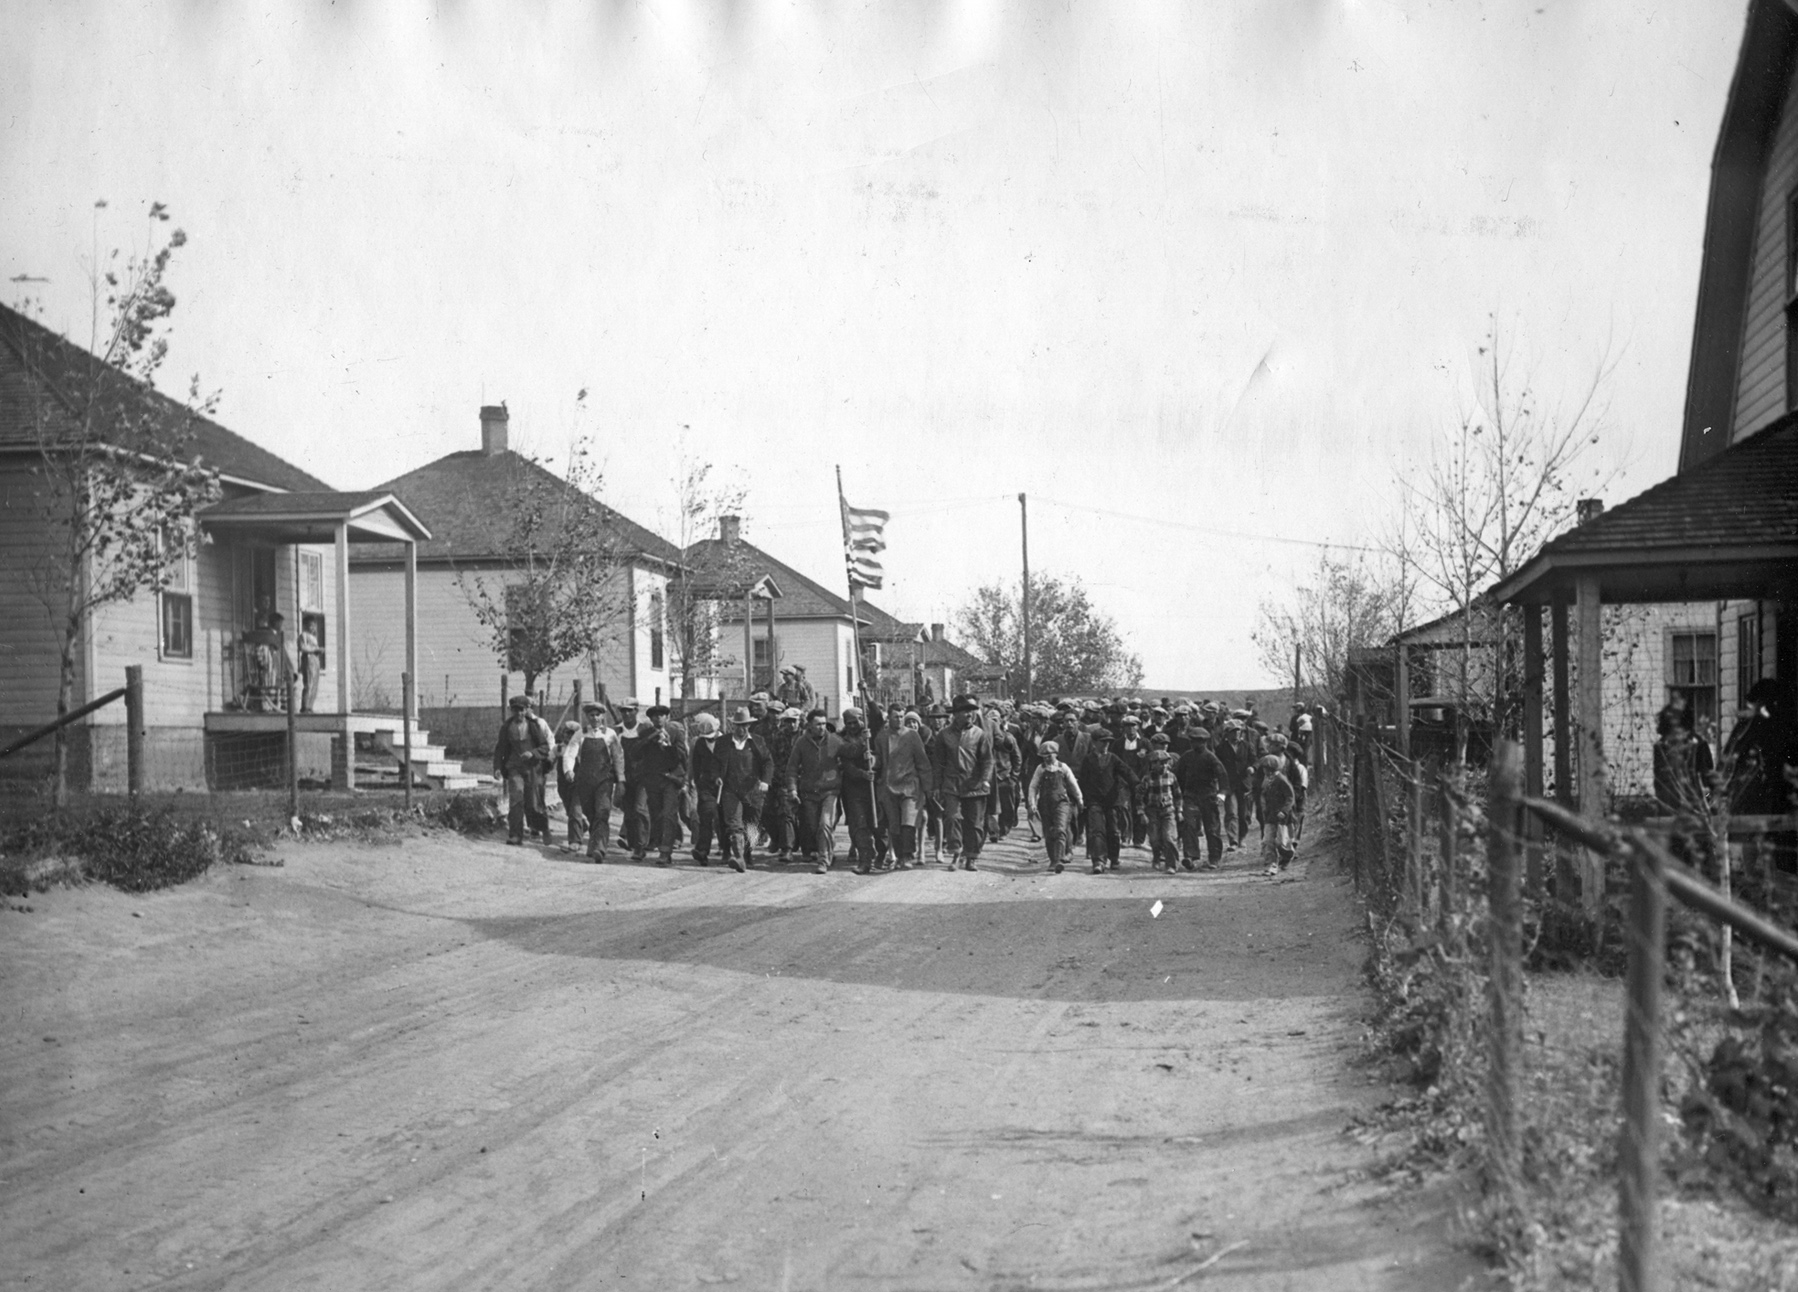 Strikers and Sympathizers marching through the camp of Walsenburg Colorado, 11/3/27.